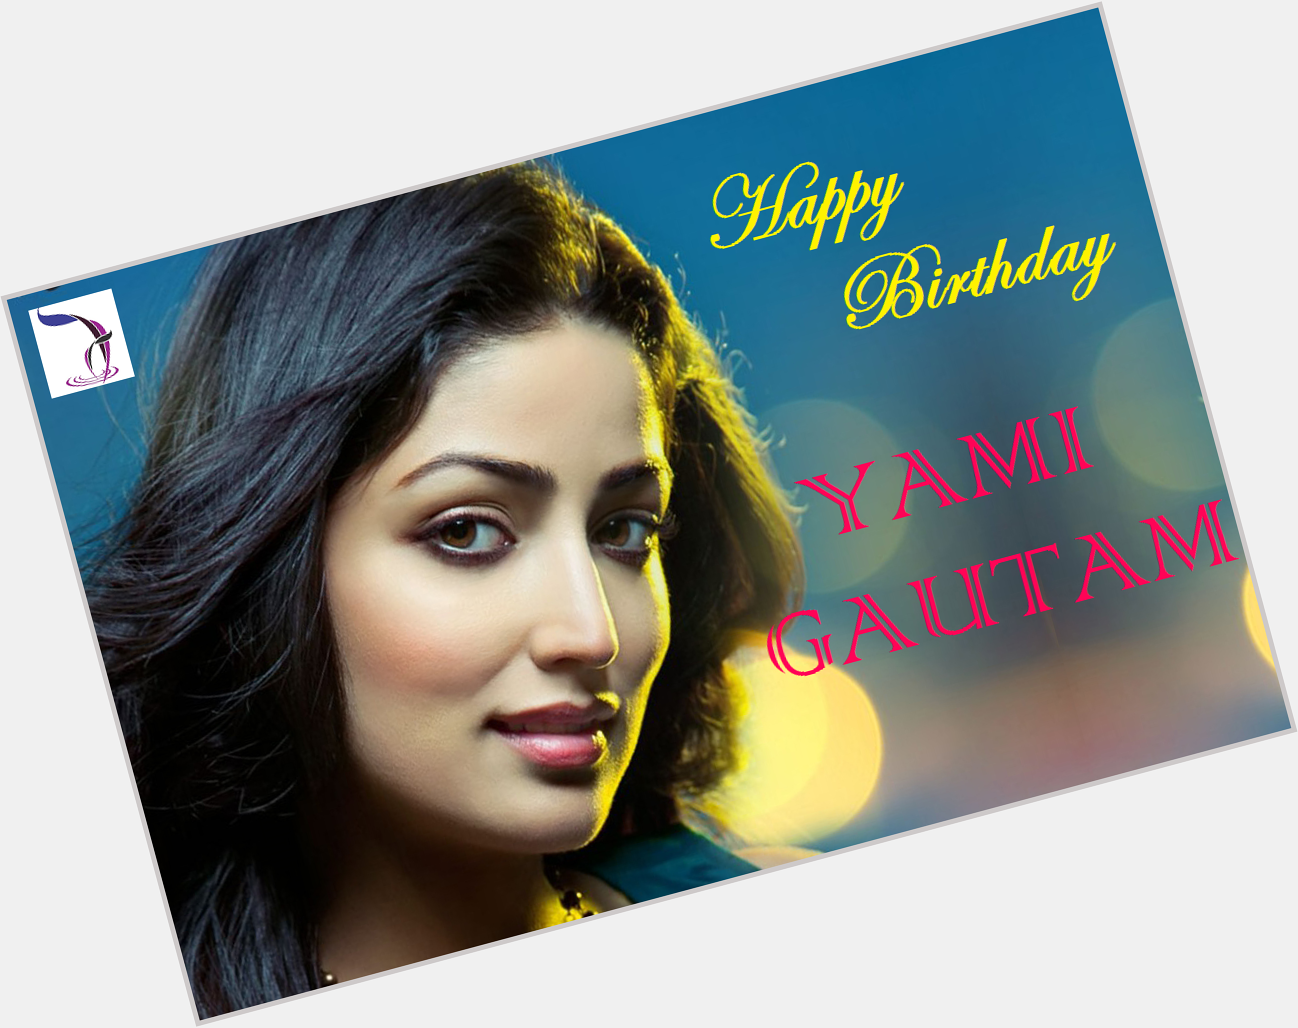 Join us in wishing the Gorgeous "Yami Gautam" a very Happy Birthday!!   